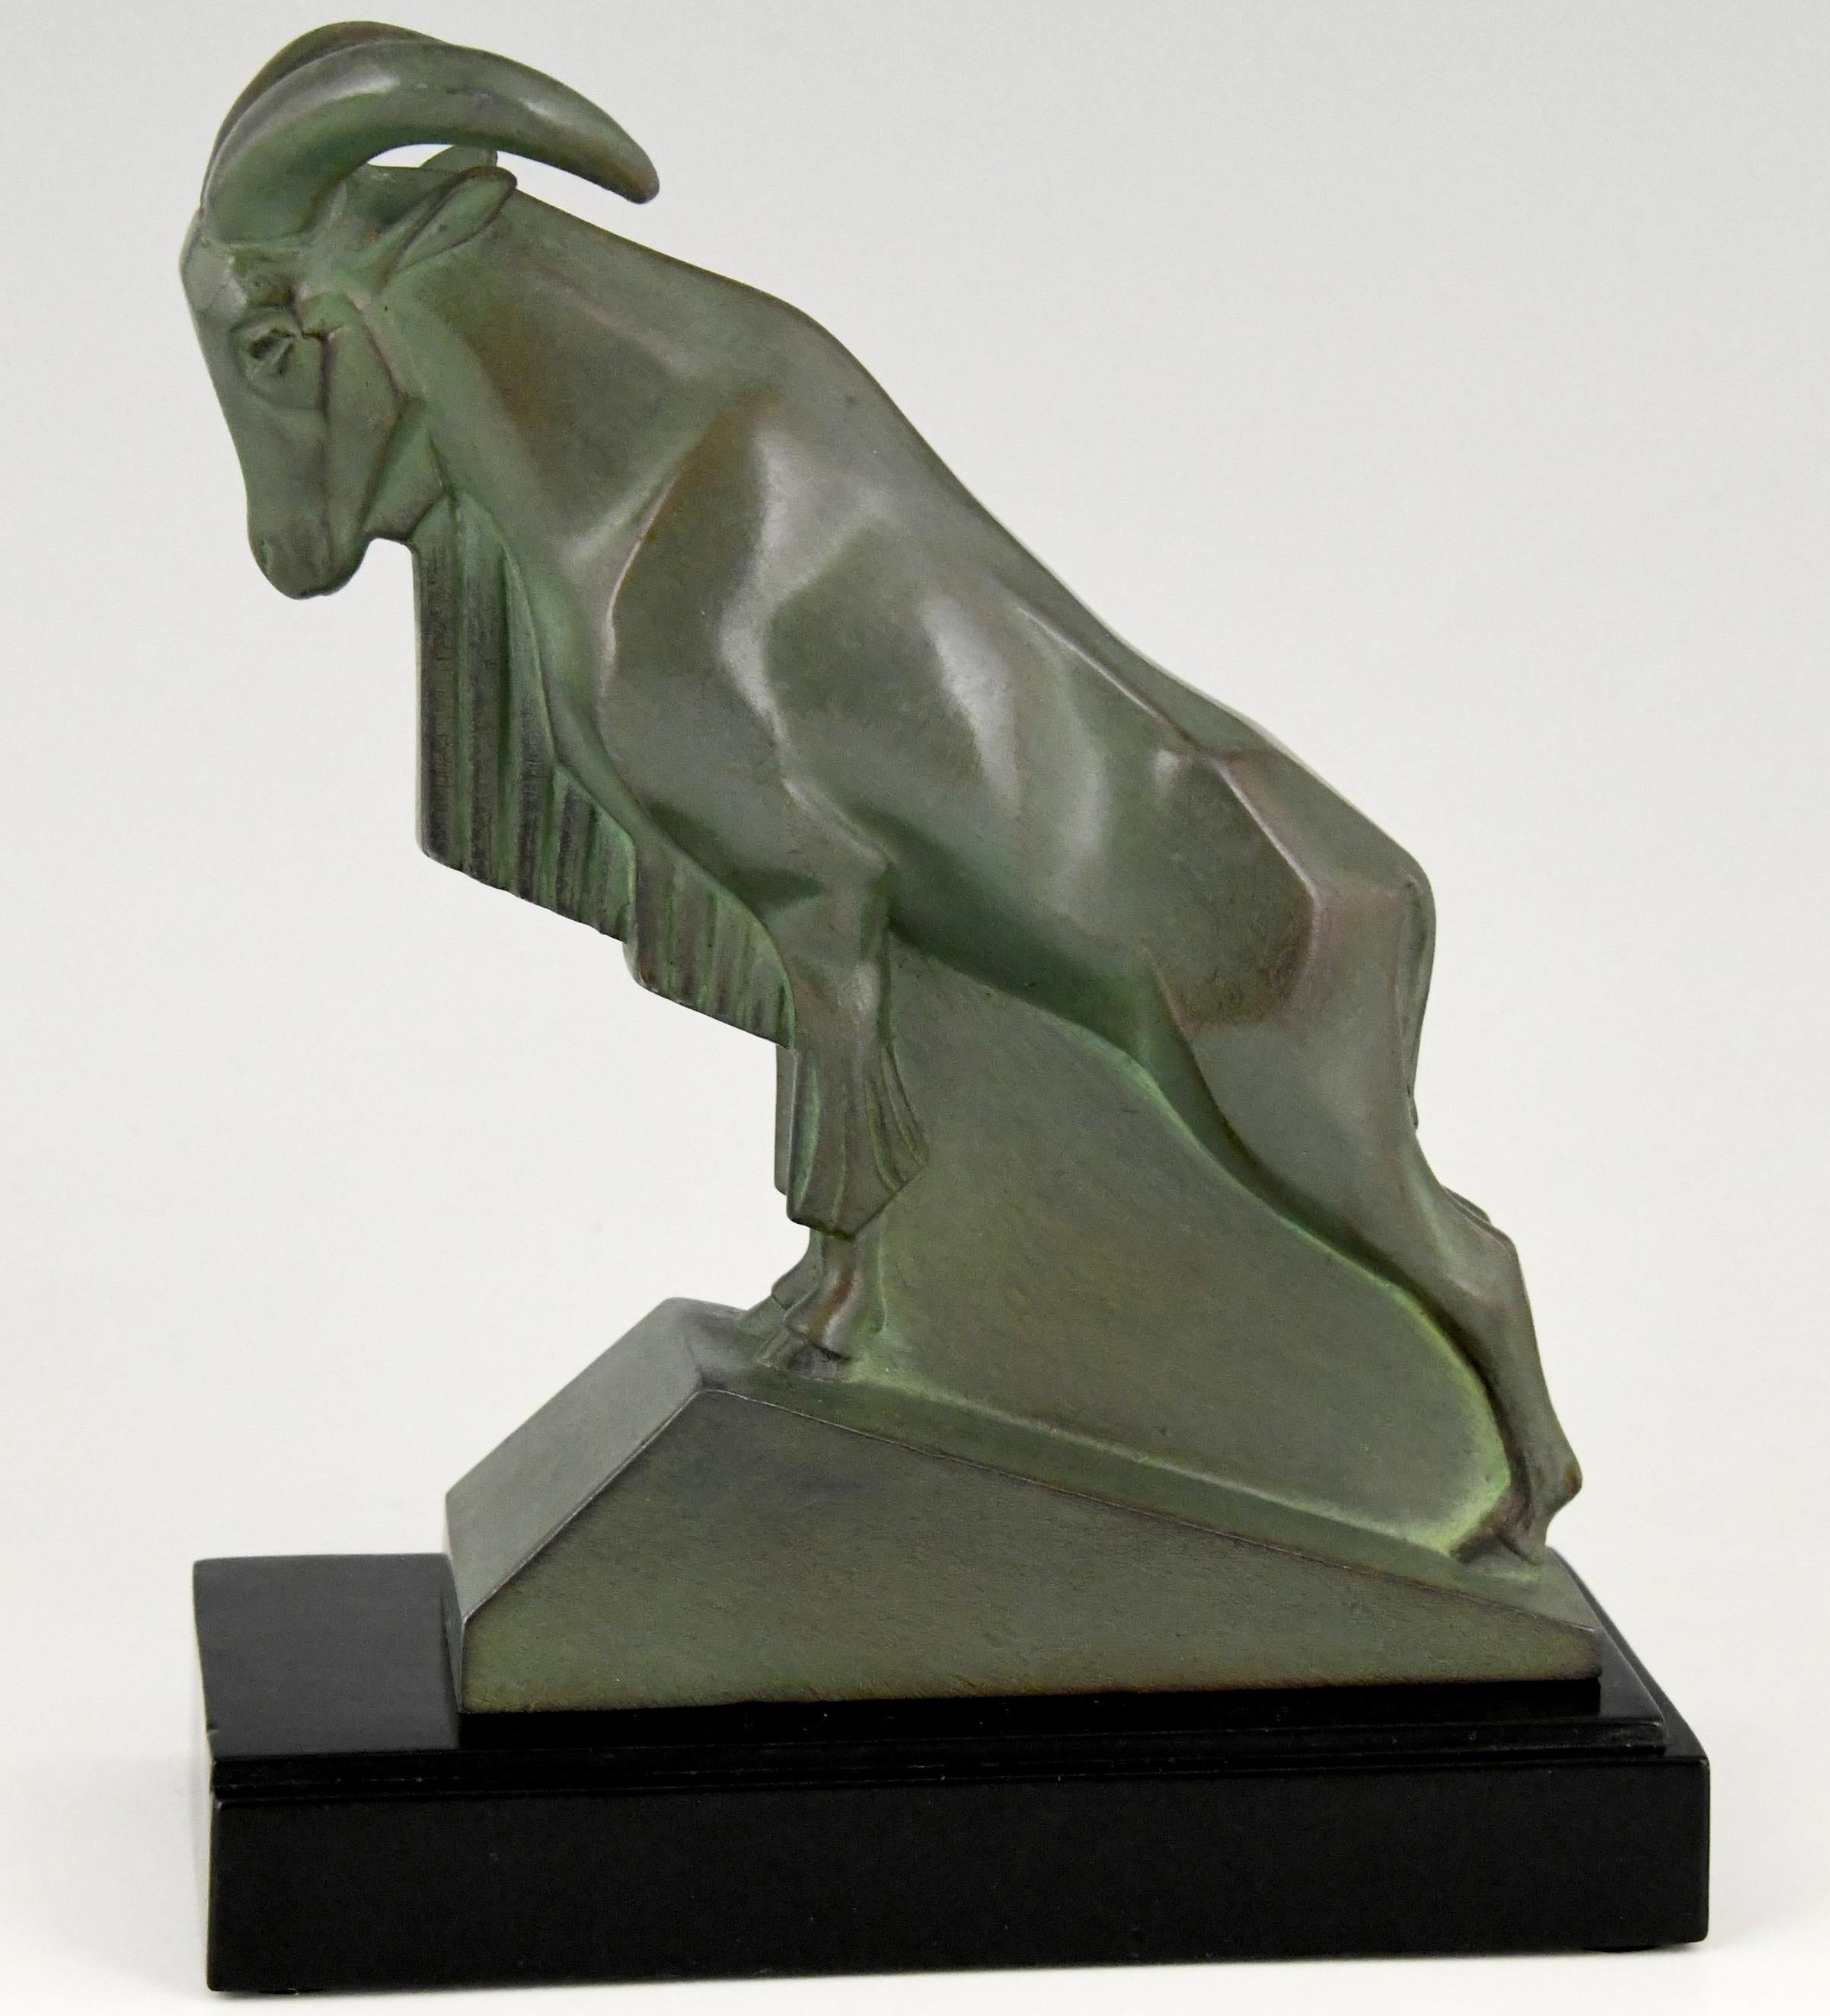 Metal Art Deco Ibex or Ram Bookends Signed by the Sculptor Max Le Verrier France, 1930 For Sale